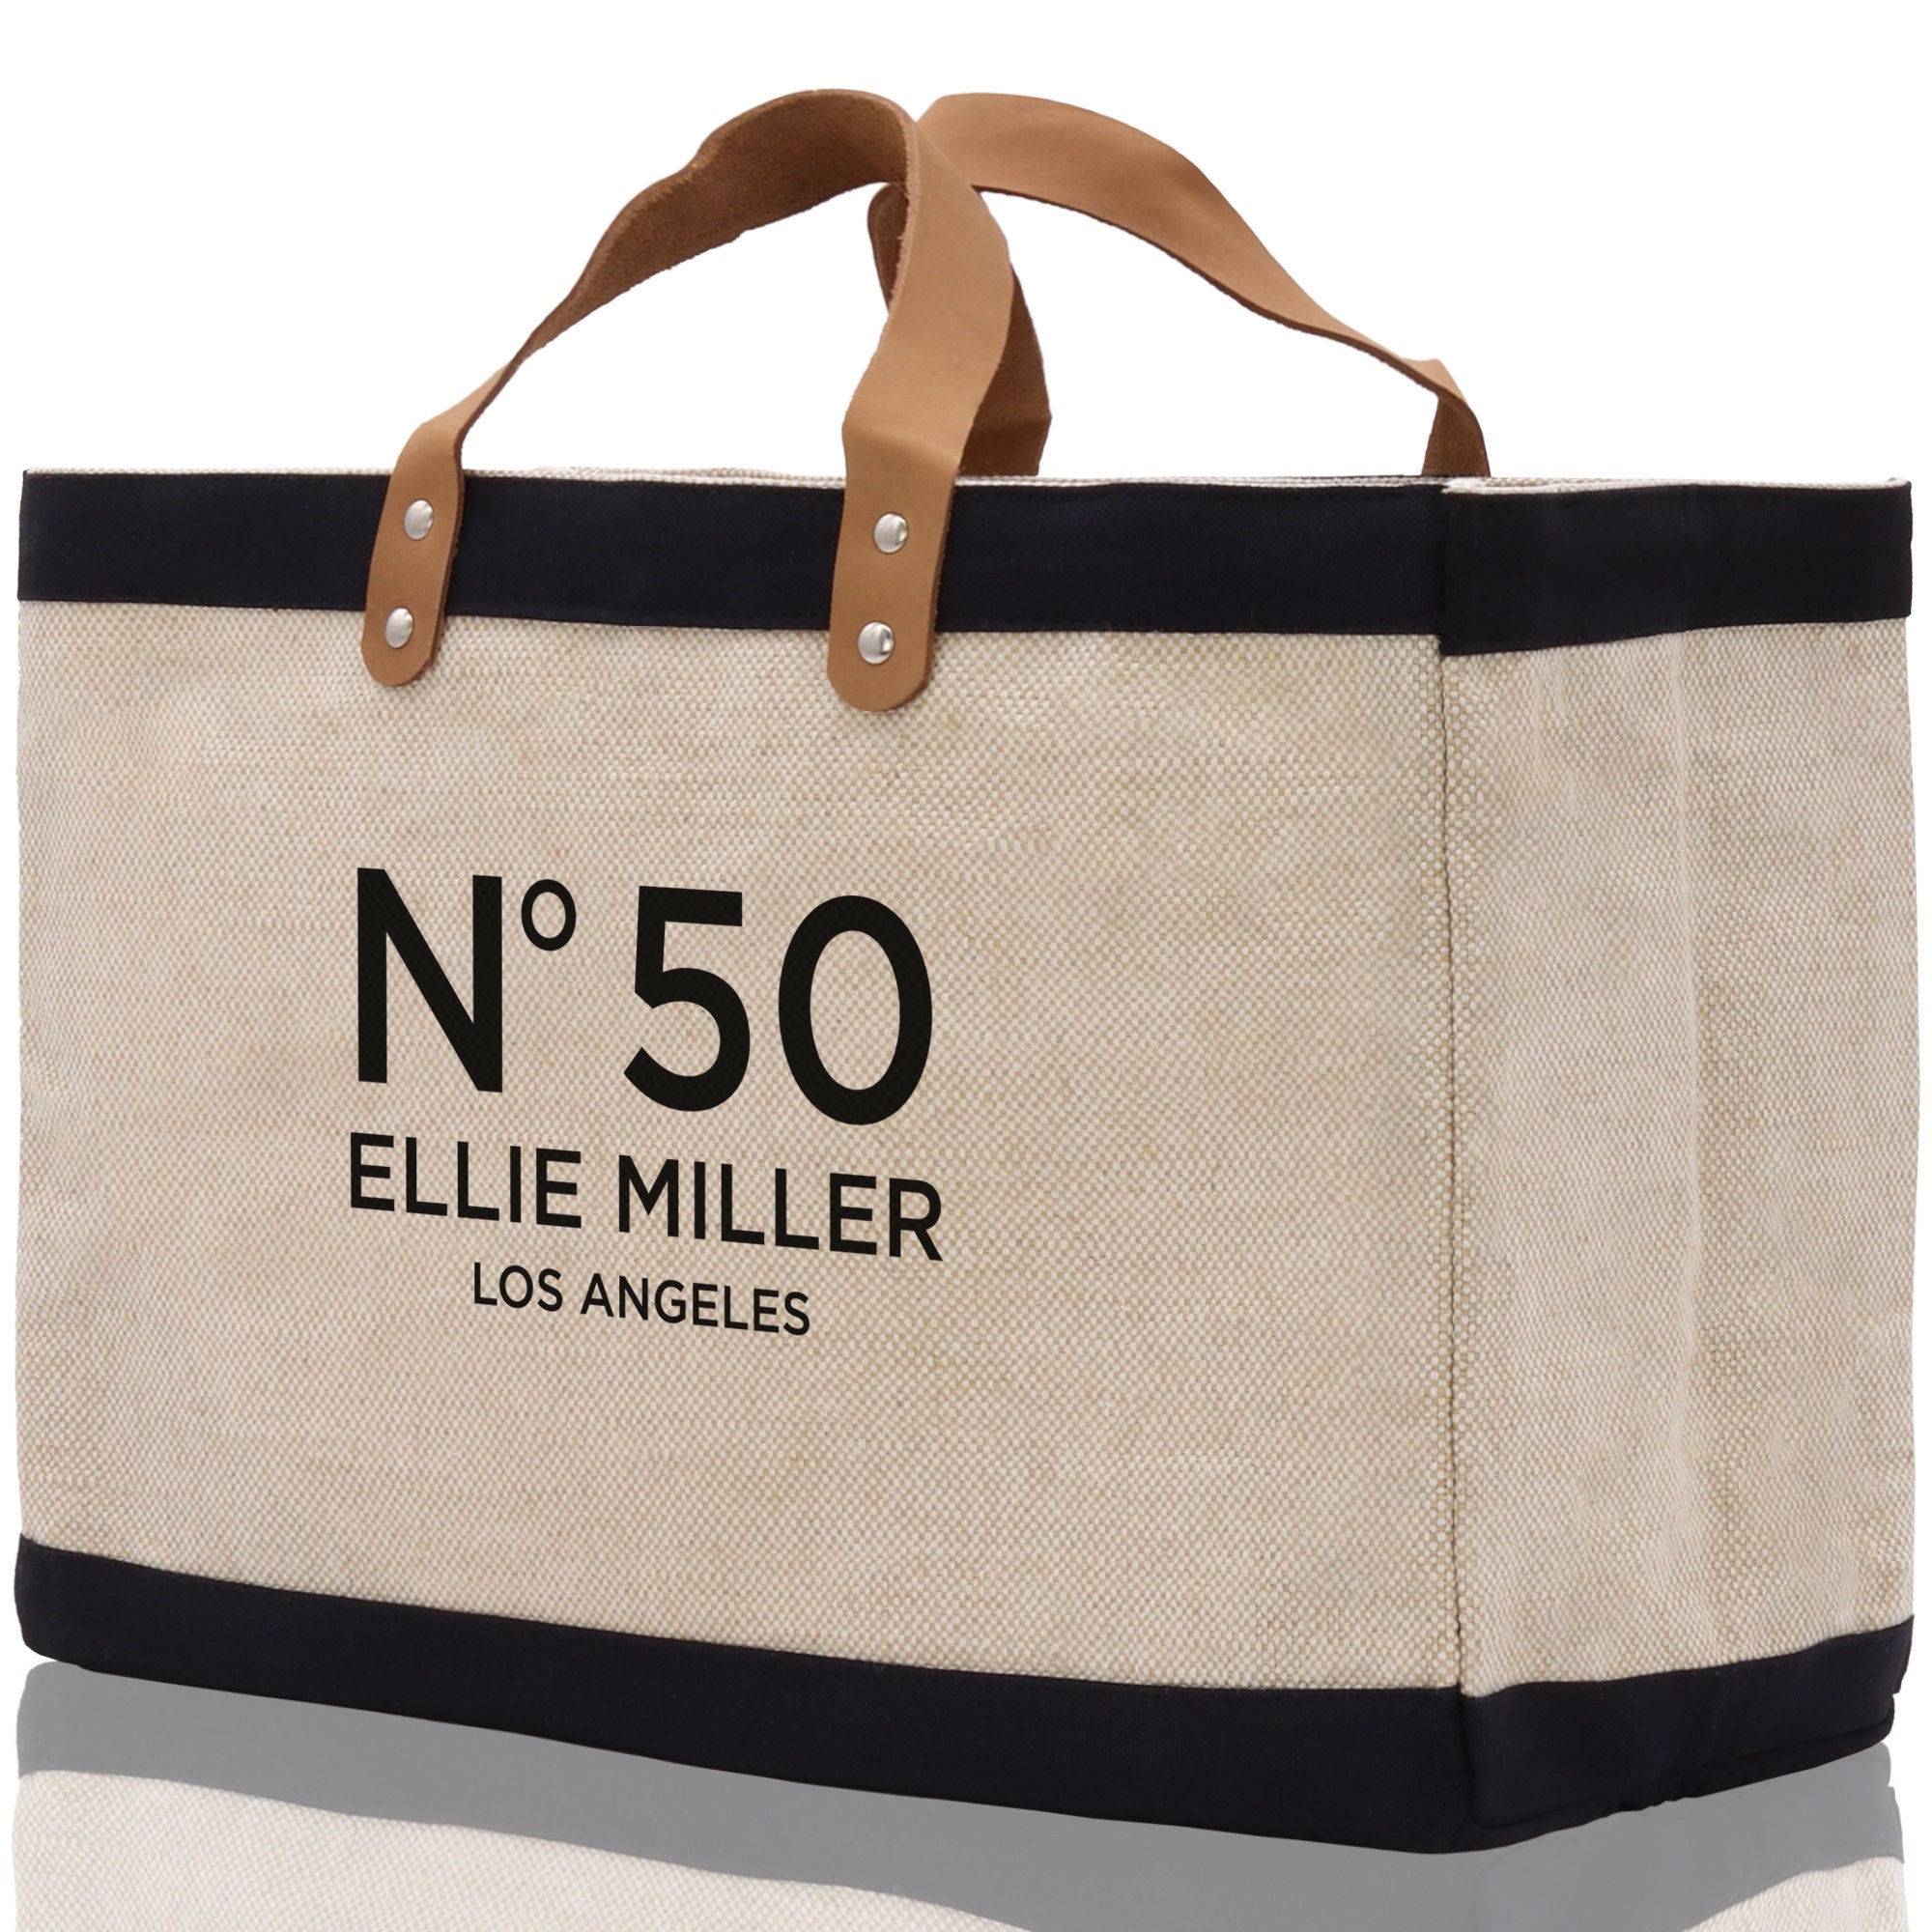 Birthday Celebration Personalized Gift Jute Tote Bag with Name and State 40th 50th Birthday Gift Jute Tote Bag for Her Custom Birthday Gift